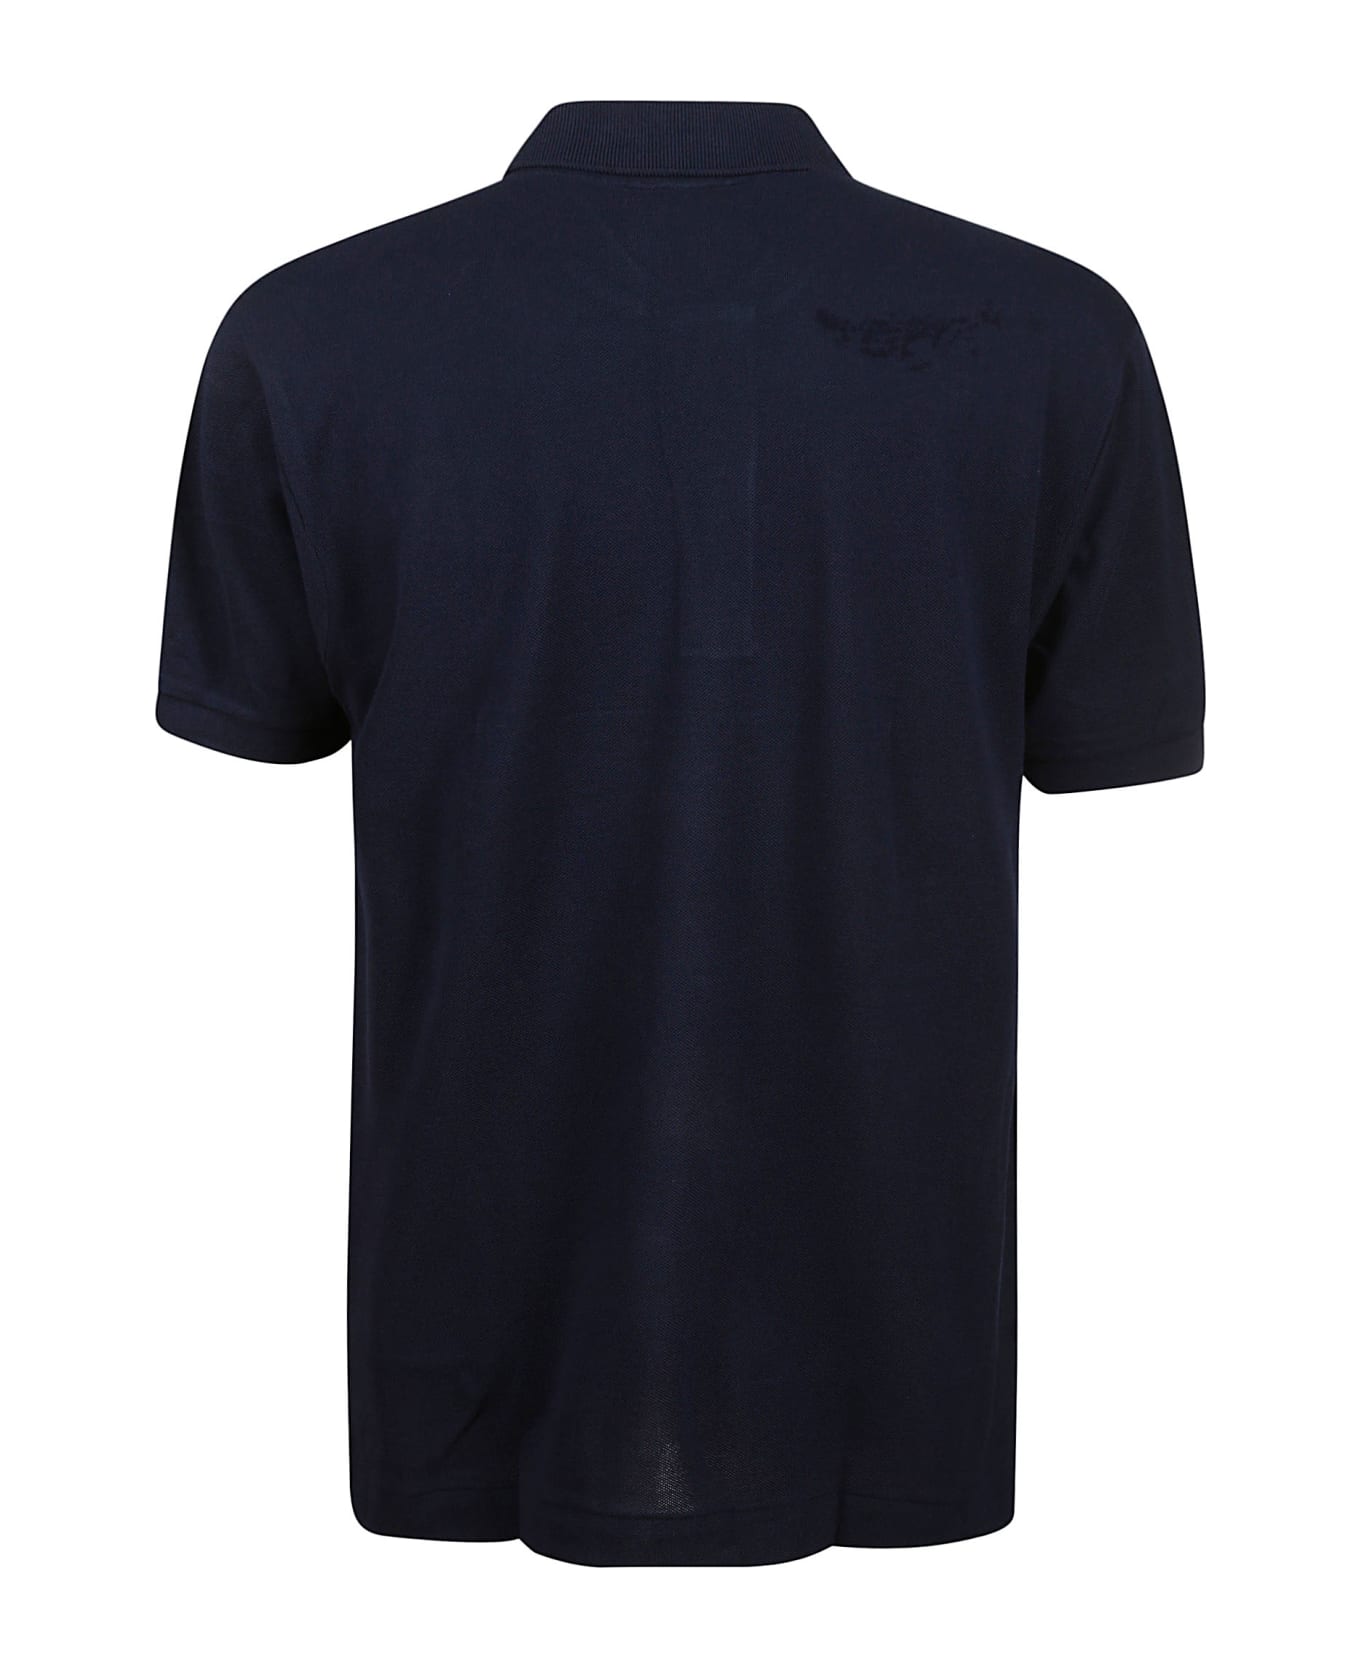 Lacoste Polo Ss - Navy Blue ポロシャツ